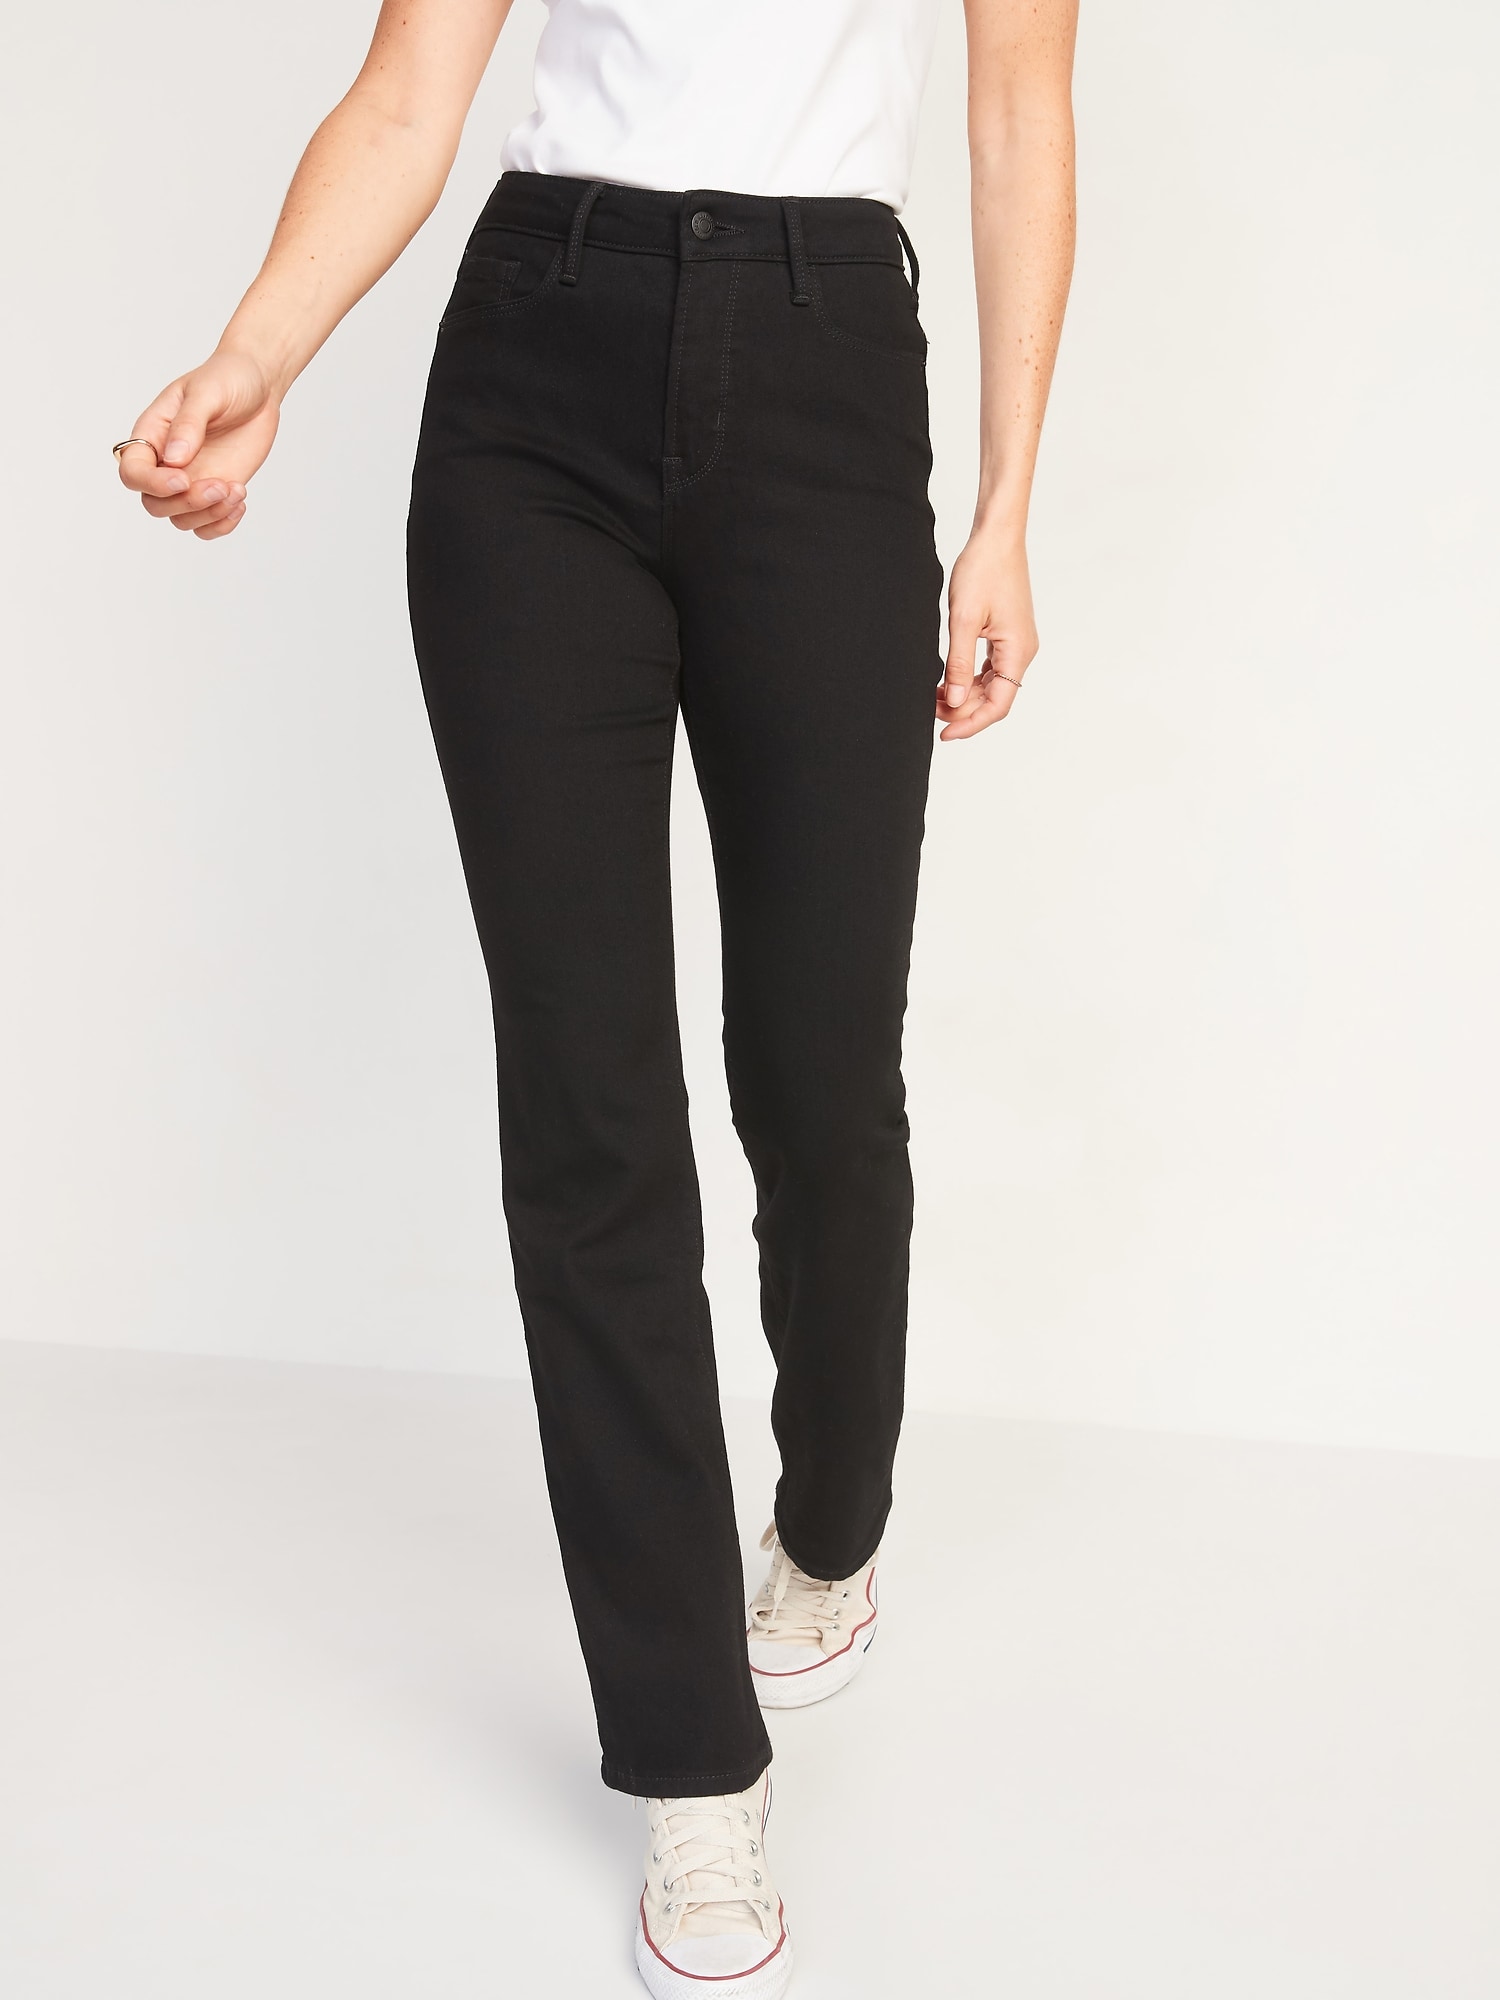 High-Waisted Kicker Boot-Cut Black Jeans for Women | Old Navy